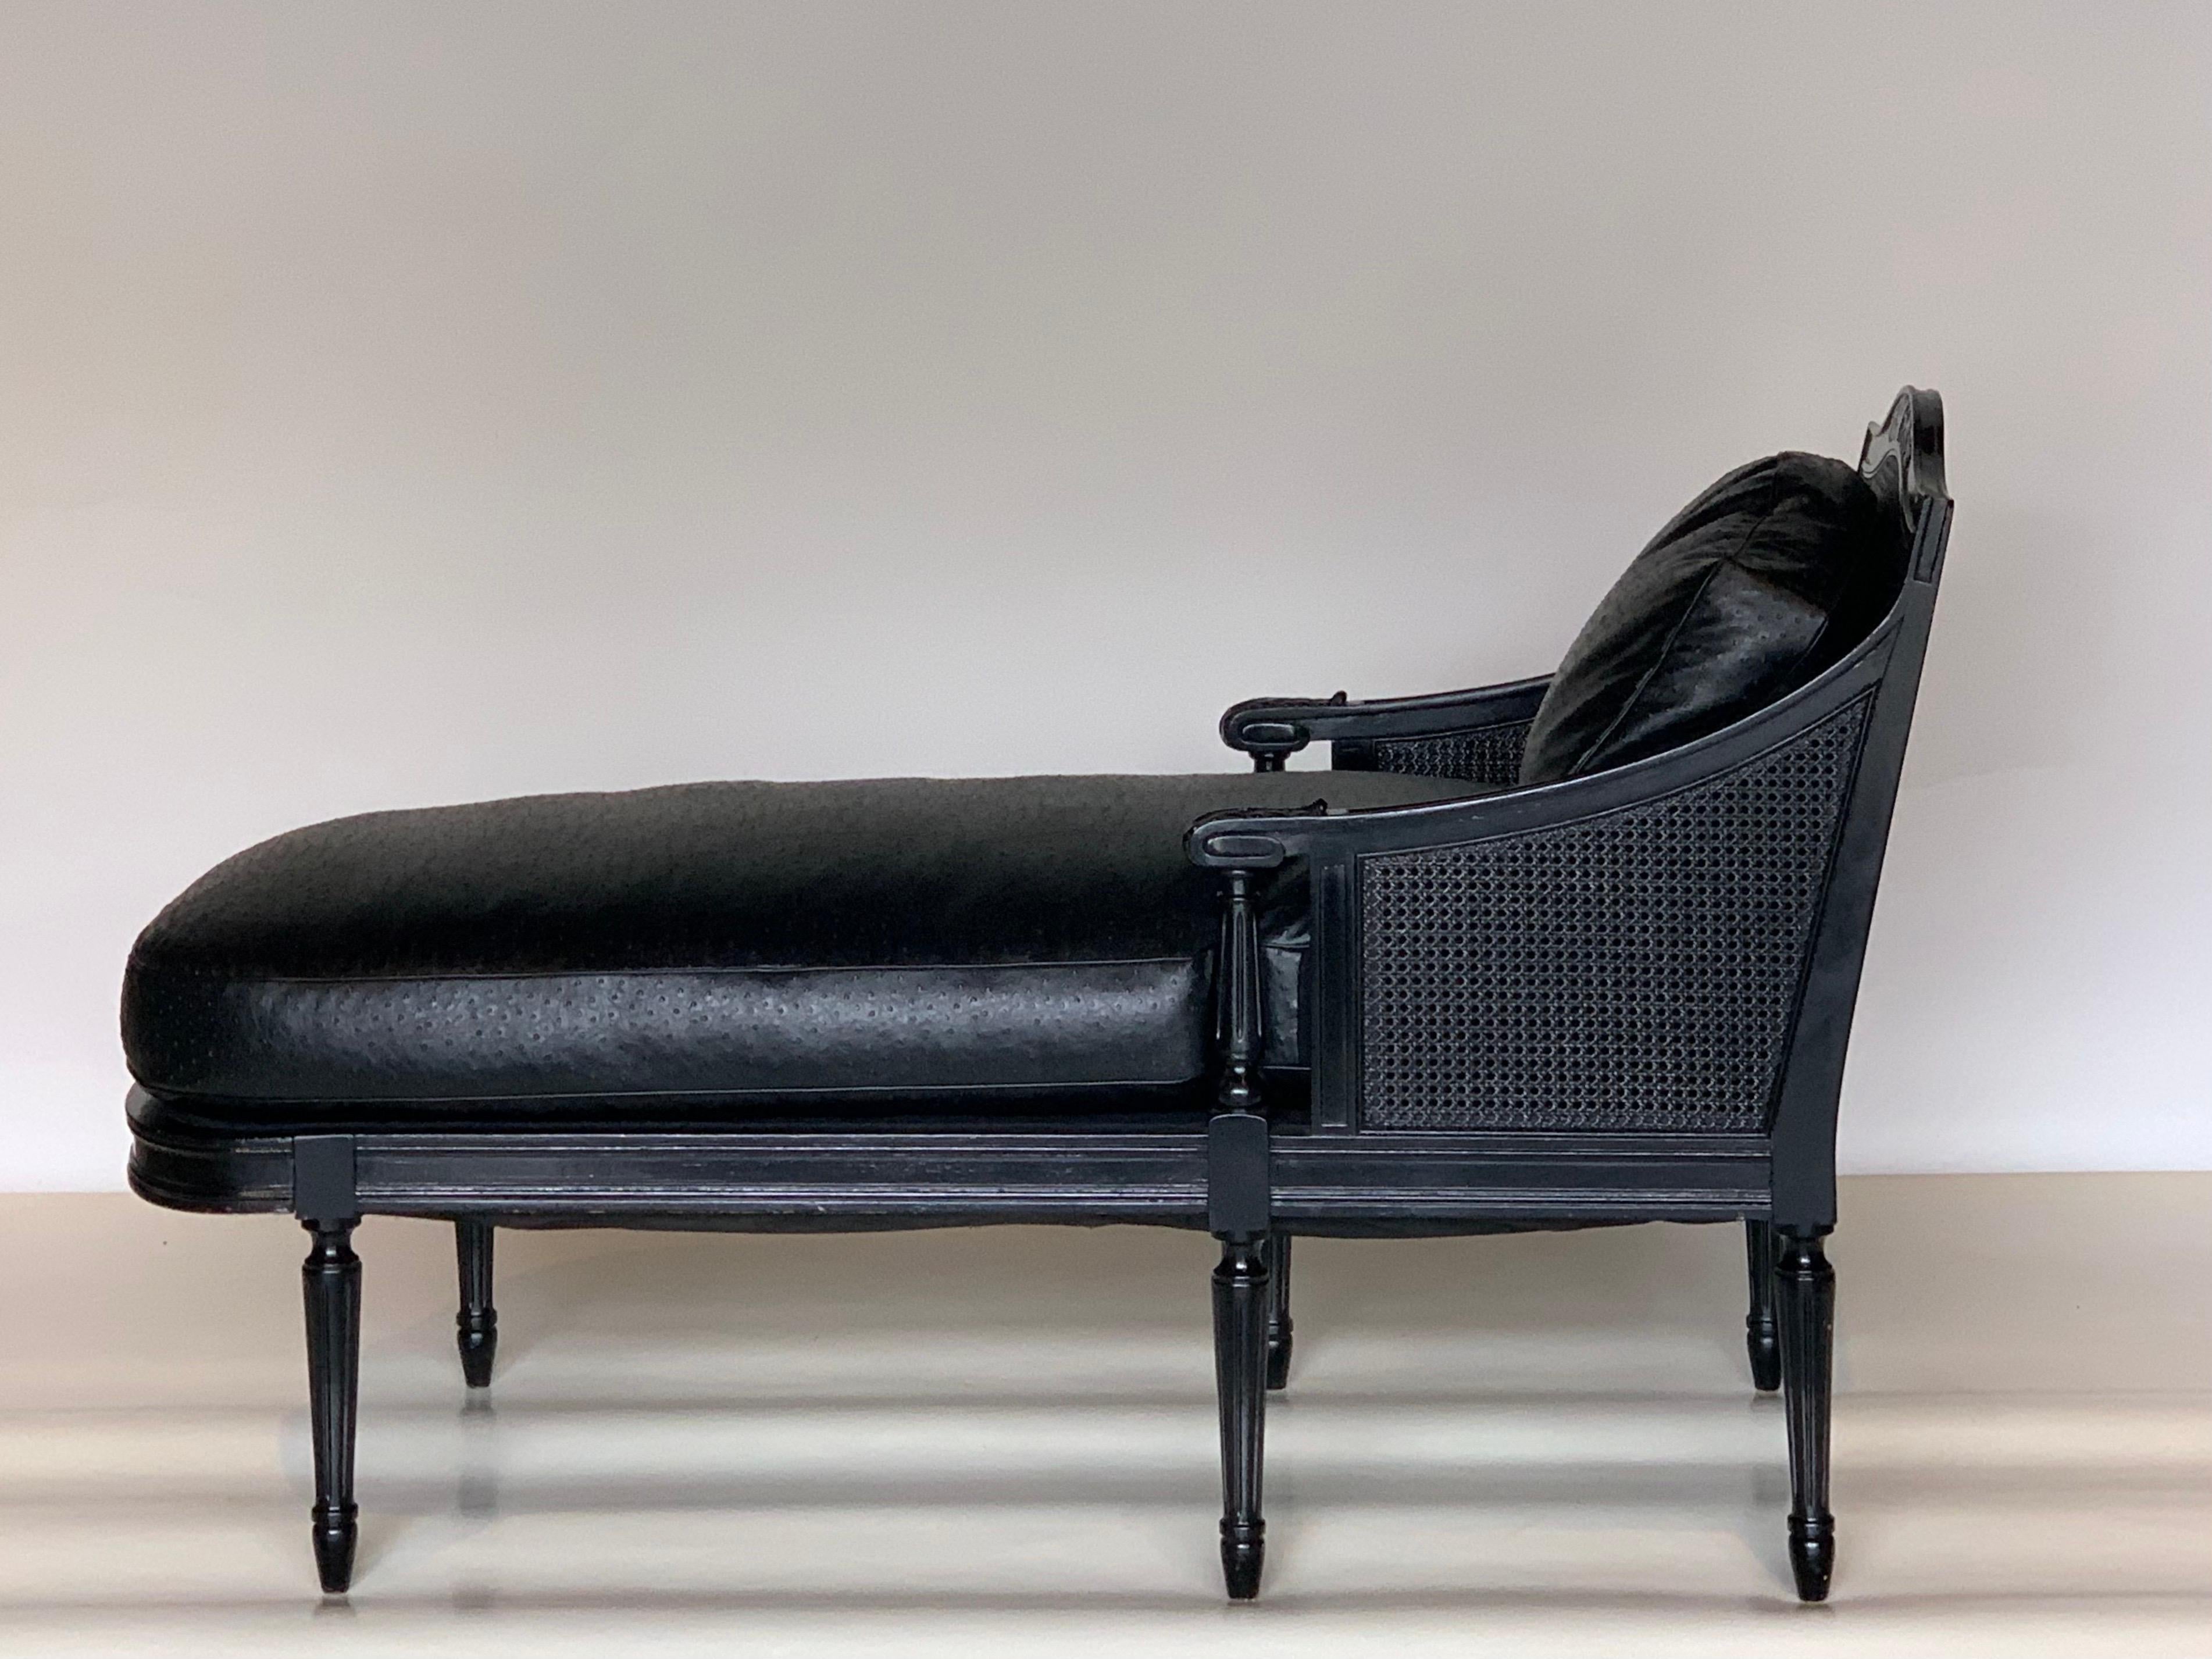 Impeccable French Louis XVI style black leather chaise longue or daybed. In the style of Maison Jansen.

Sturdy lacquered caned hardwood frame with ostrich pattern black emu leather upholstery.